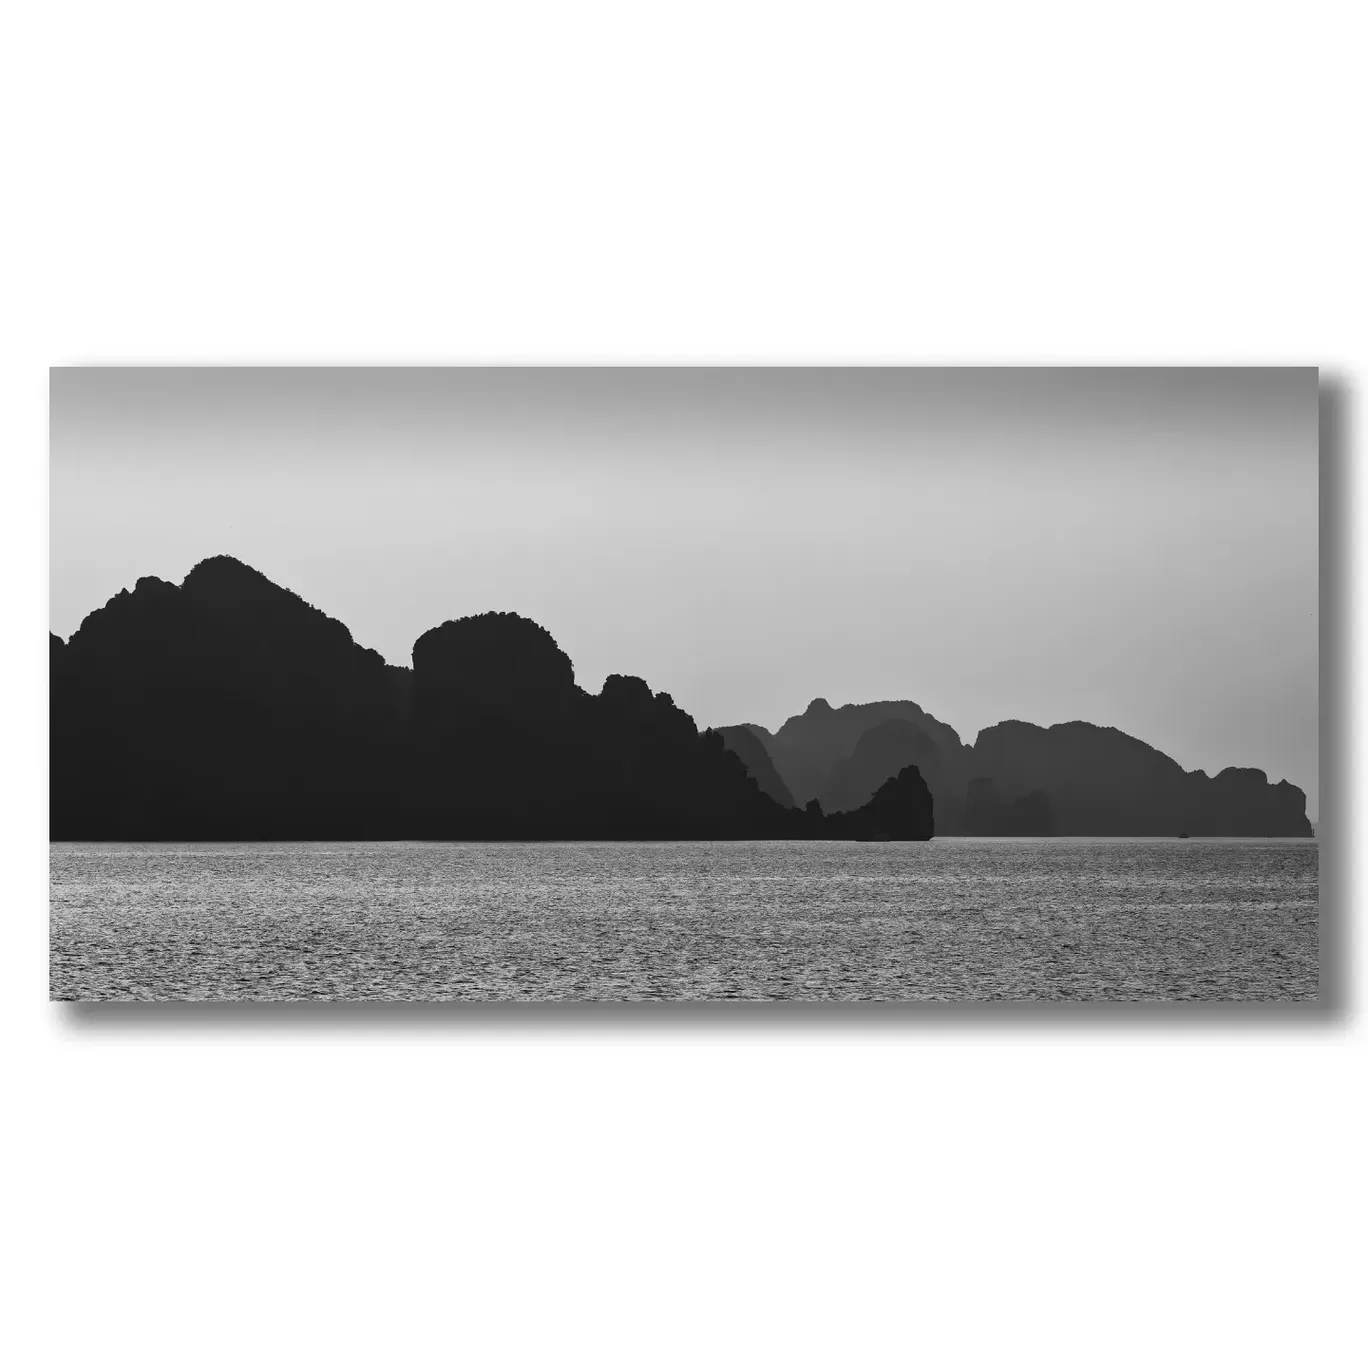 Photo of Halong Bay By Puneet Verma